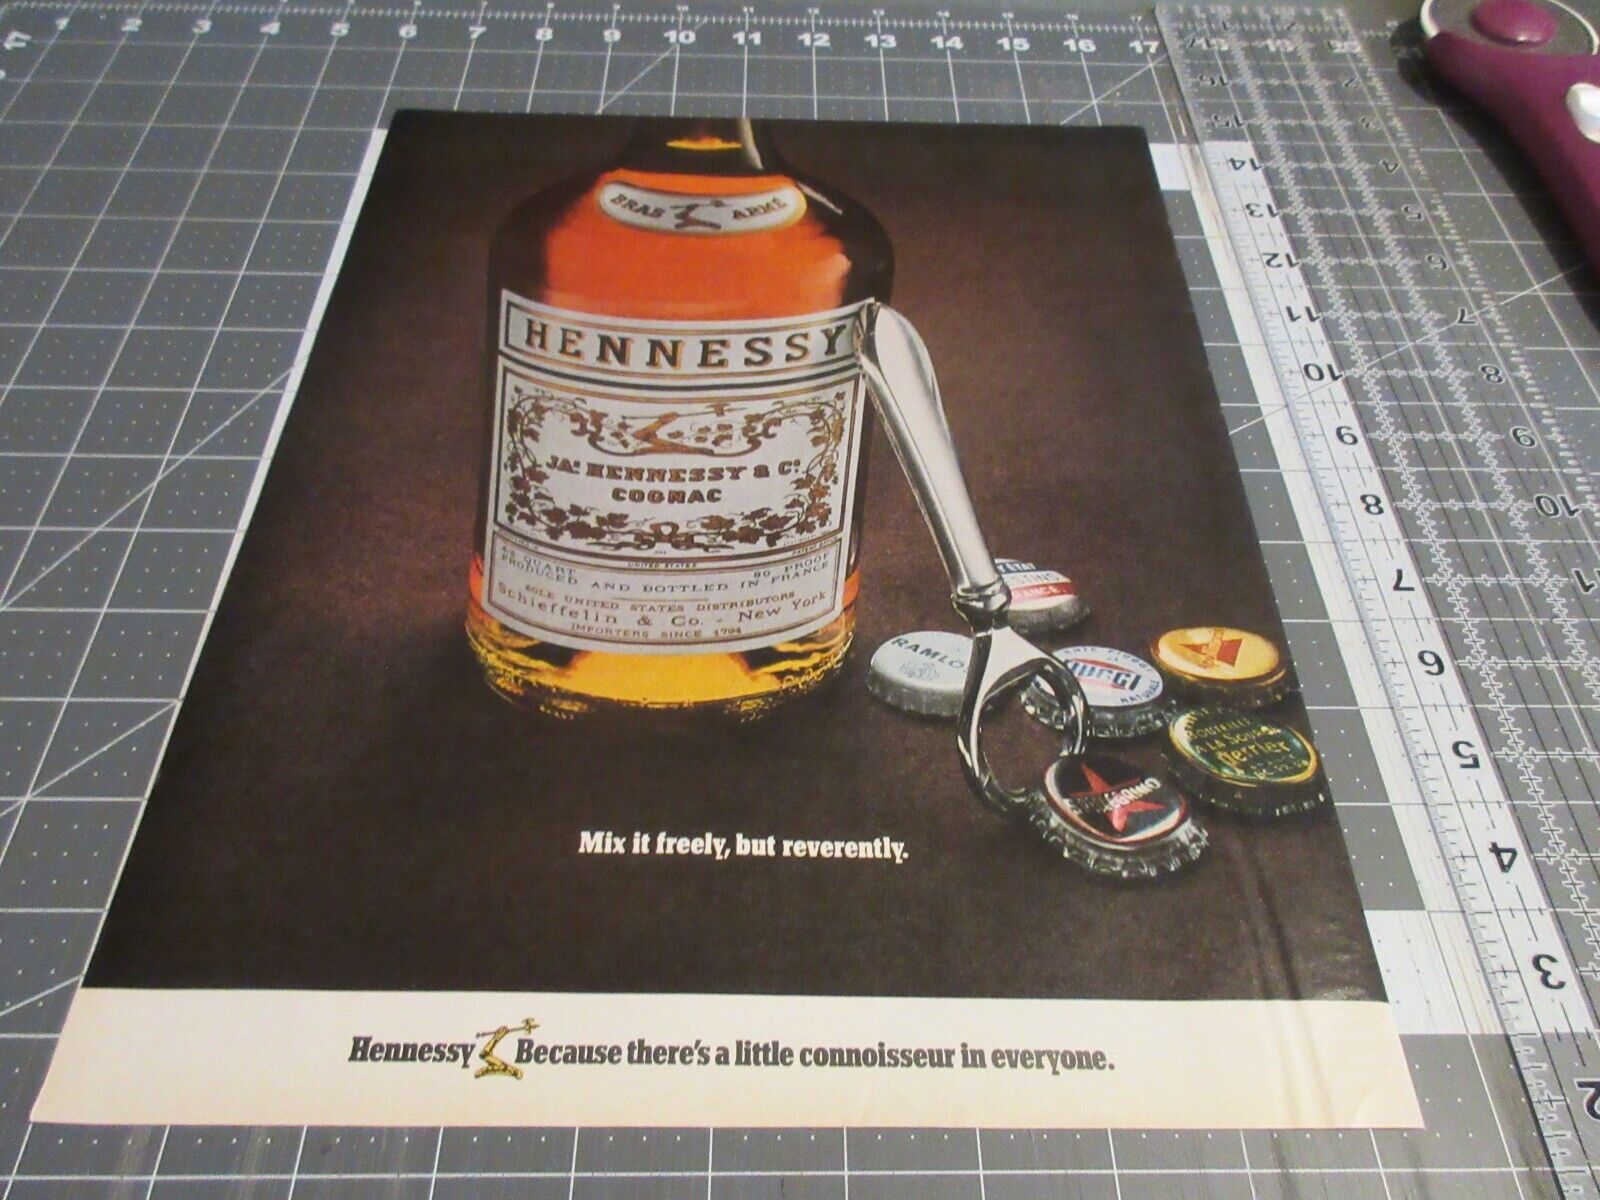 1971 Hennessy, Mix it Freely, but reverently, Vintage Print Ad